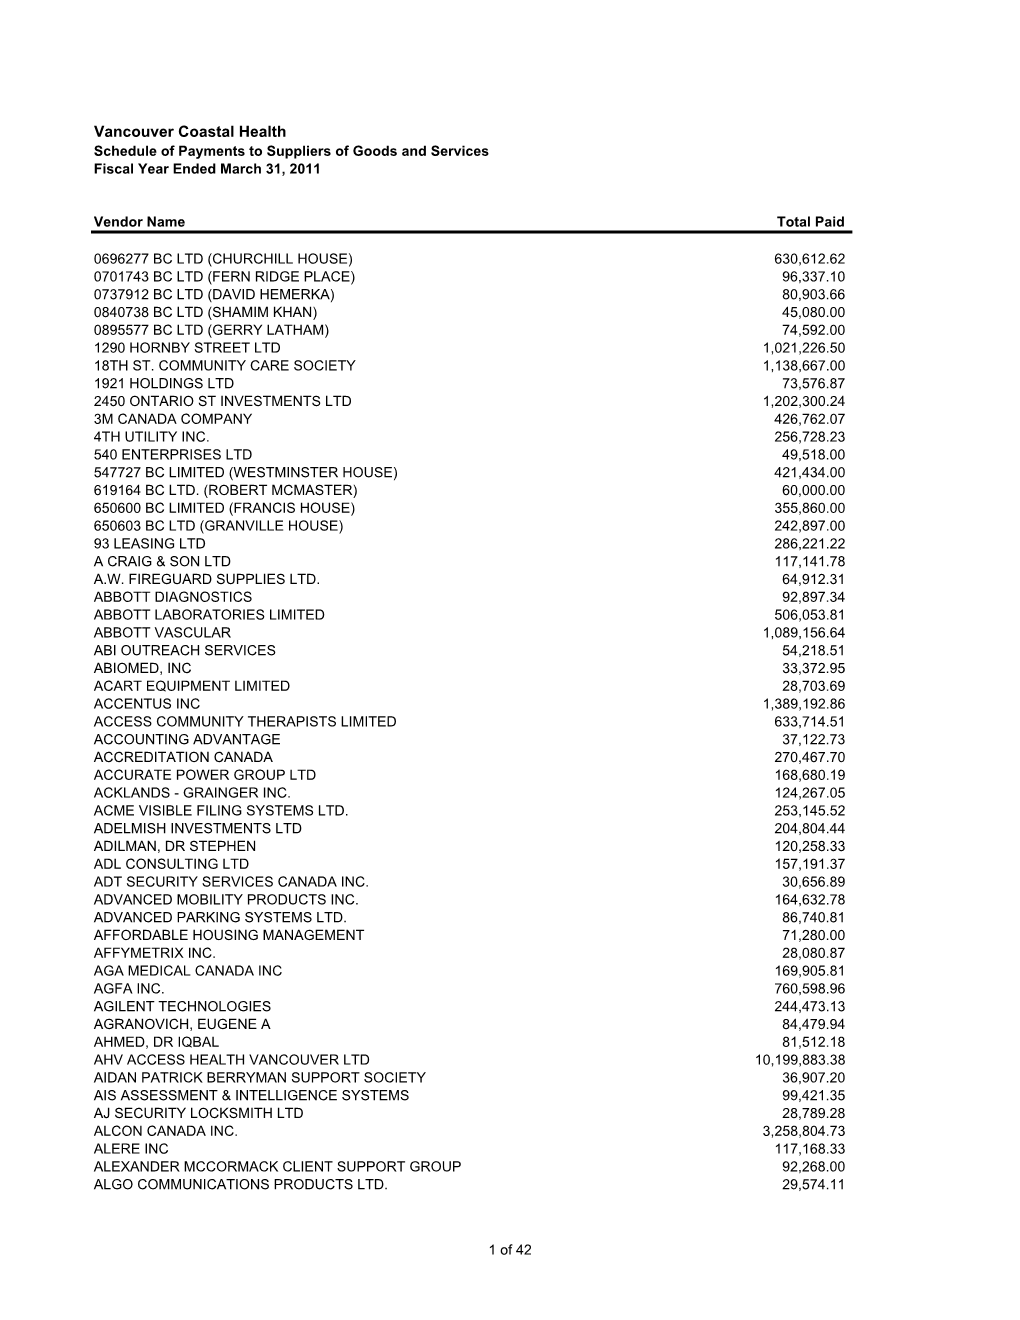 Vancouver Coastal Health Schedule of Payments to Suppliers of Goods and Services Fiscal Year Ended March 31, 2011